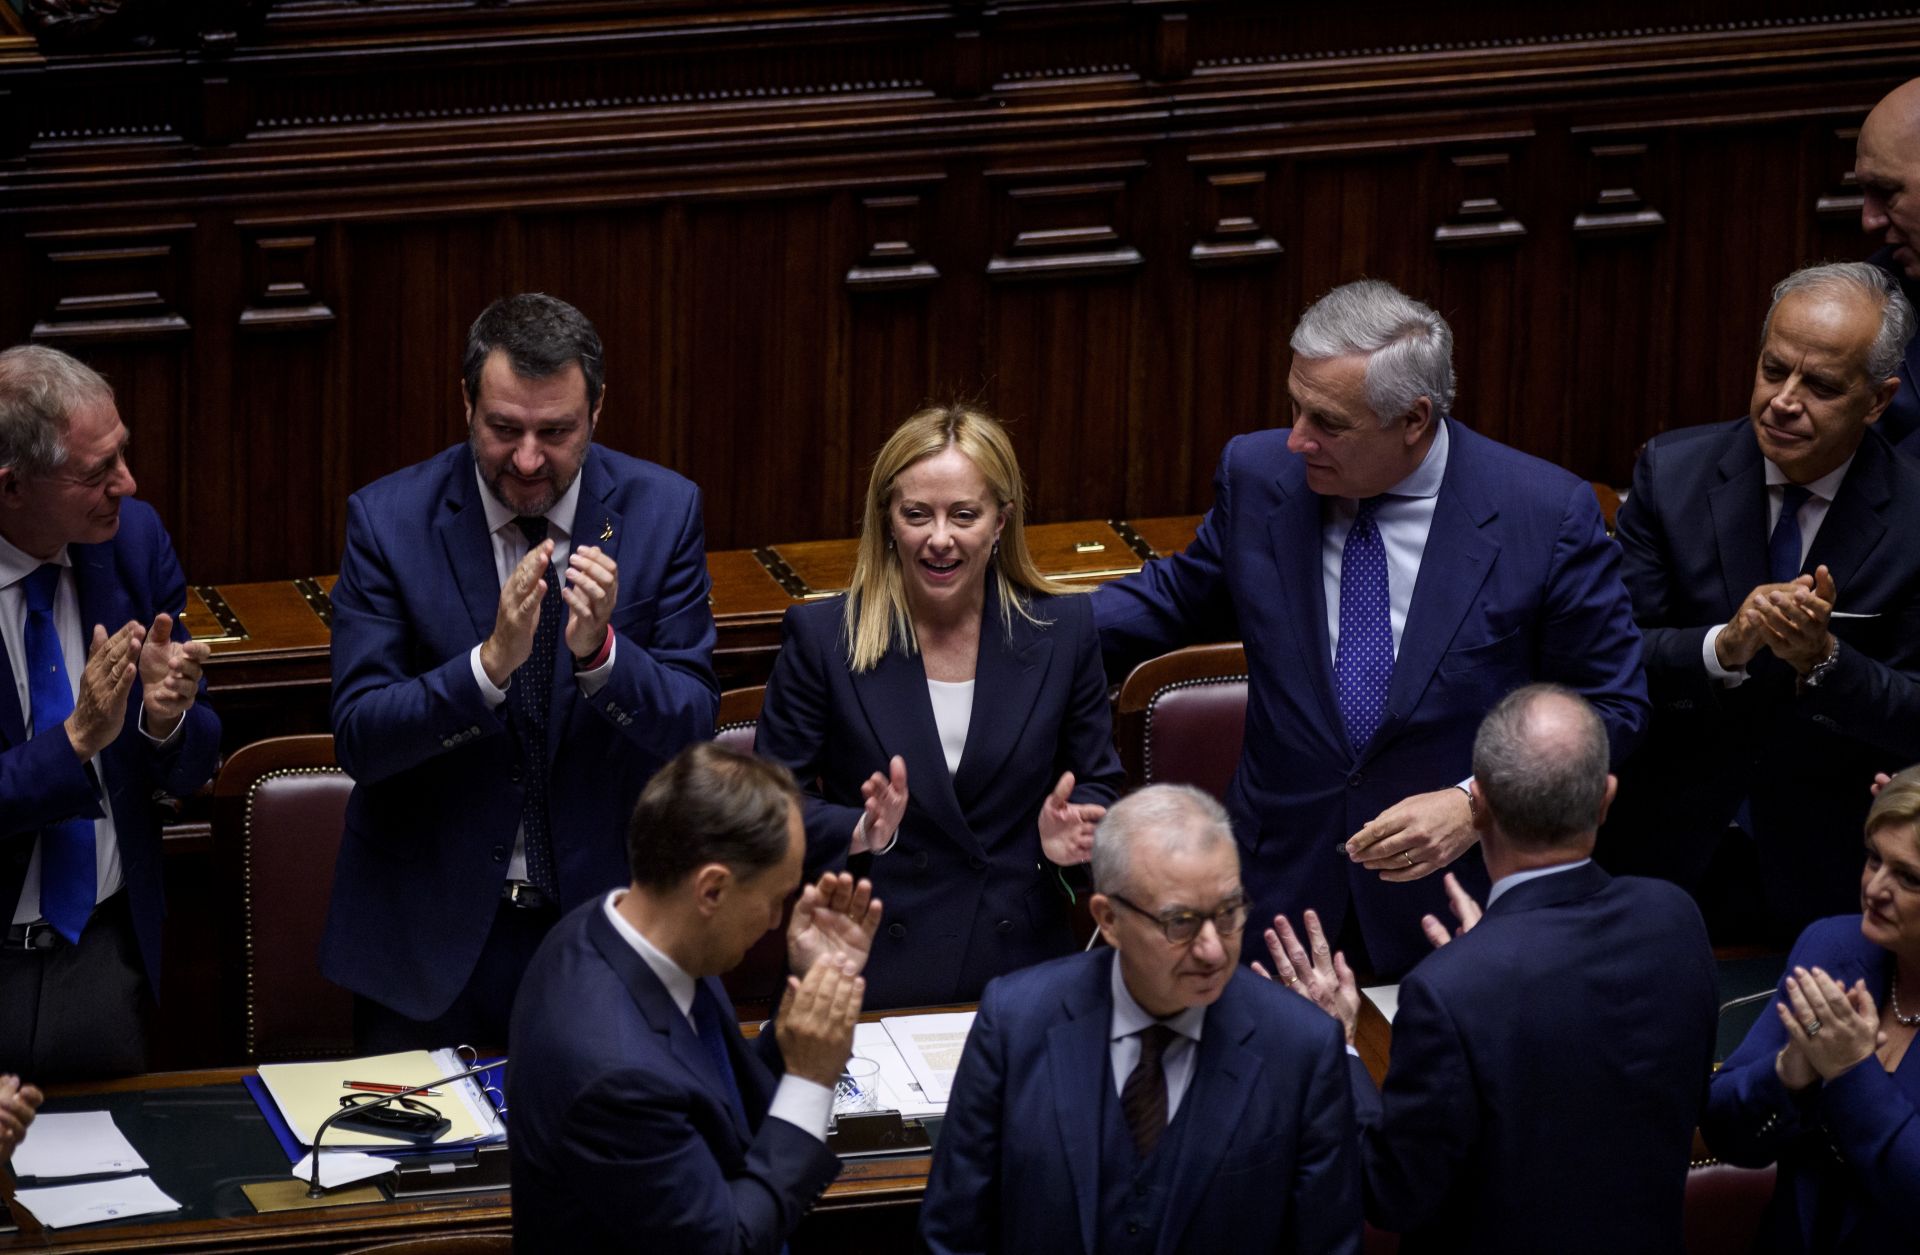 Italian Prime Minister Giorgia Meloni and members of her newly appointed cabinet attend a debate in Italy’s Chamber of Deputies ahead of the confidence vote on the new Italian government on Oct. 25, 2022. 